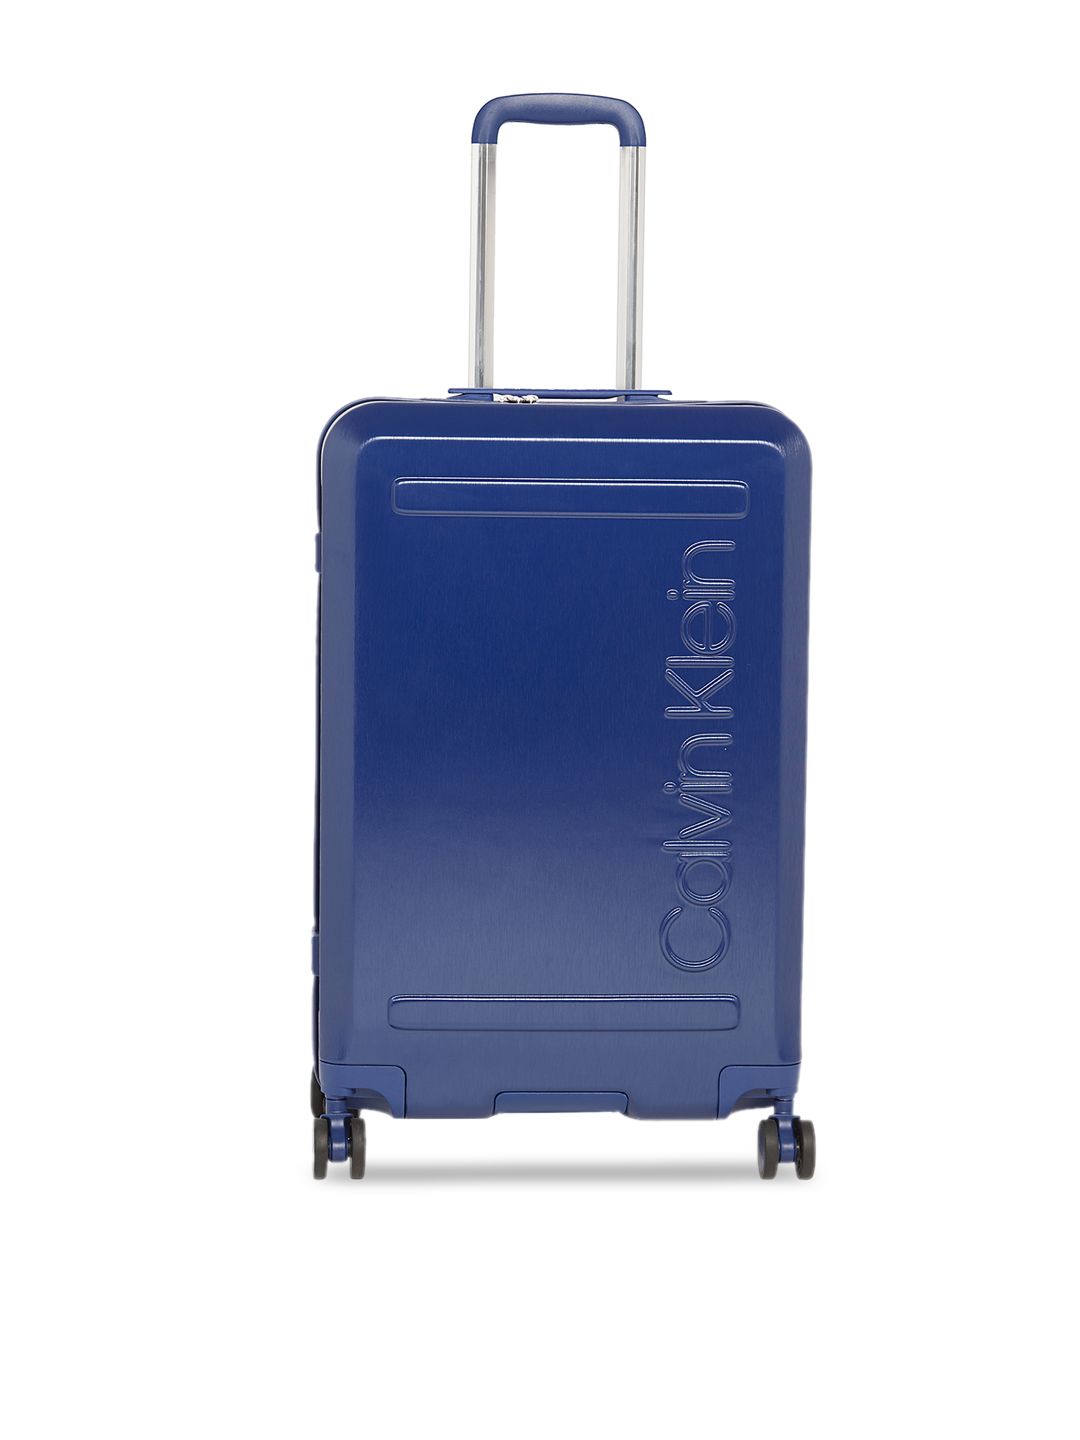 Calvin Klein Blue Solid Soho 360-Degree Rotation Hard-Sided Medium Trolley Suitcase Price in India